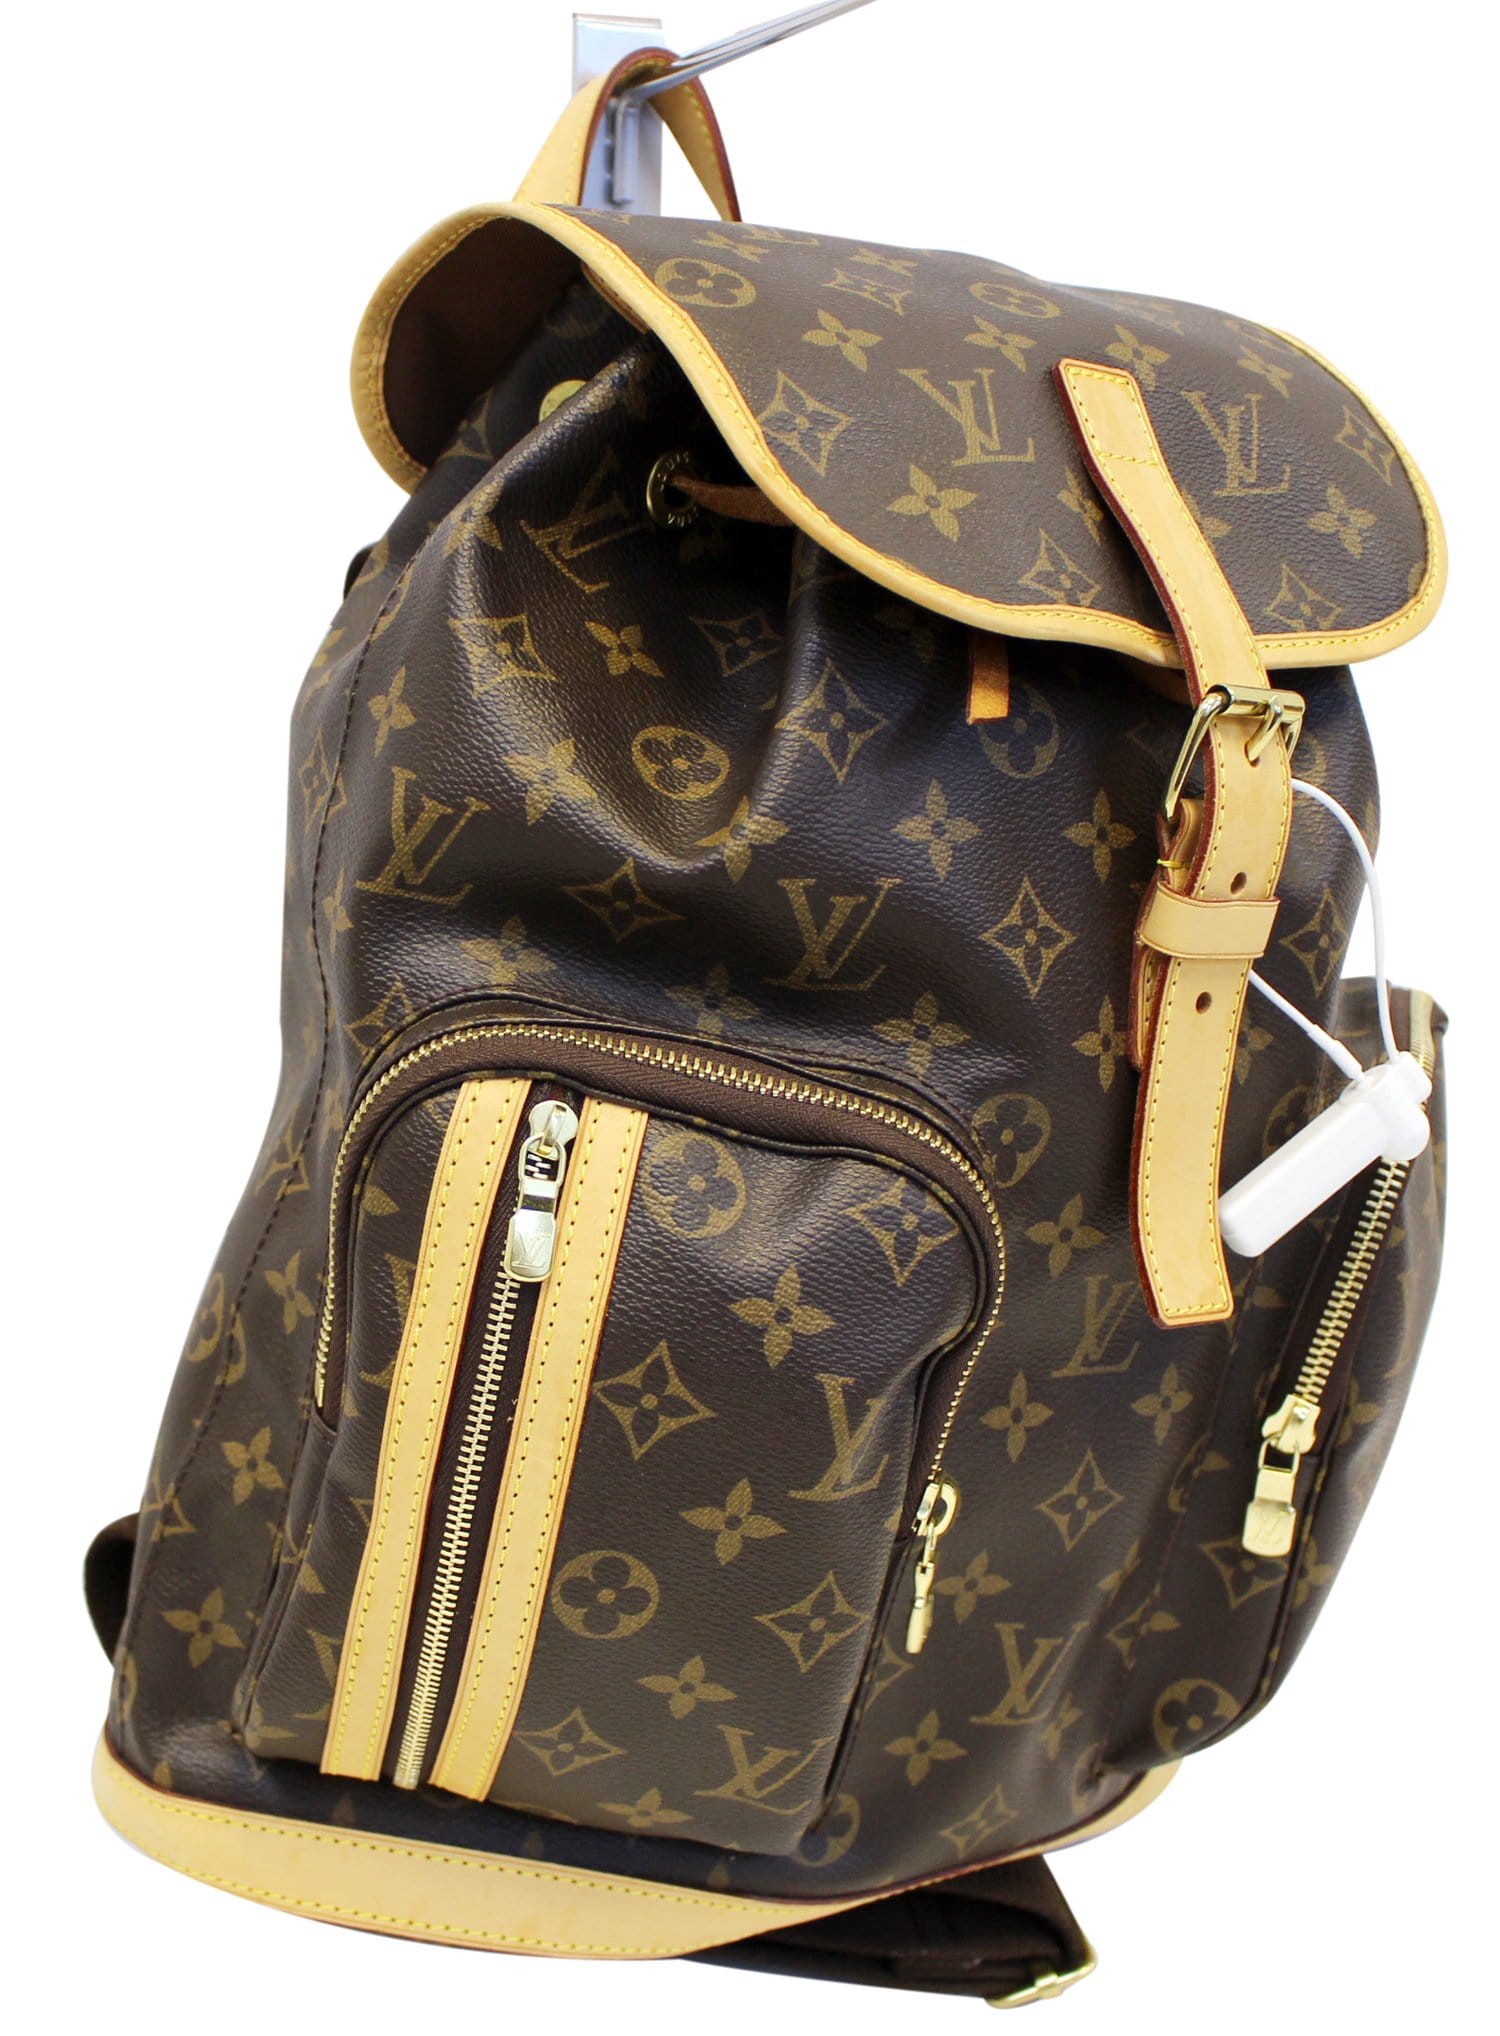 Products by Louis Vuitton: Bosphore Backpack  Monograma de louis vuitton, Louis  vuitton, Gafas de sol louis vuitton